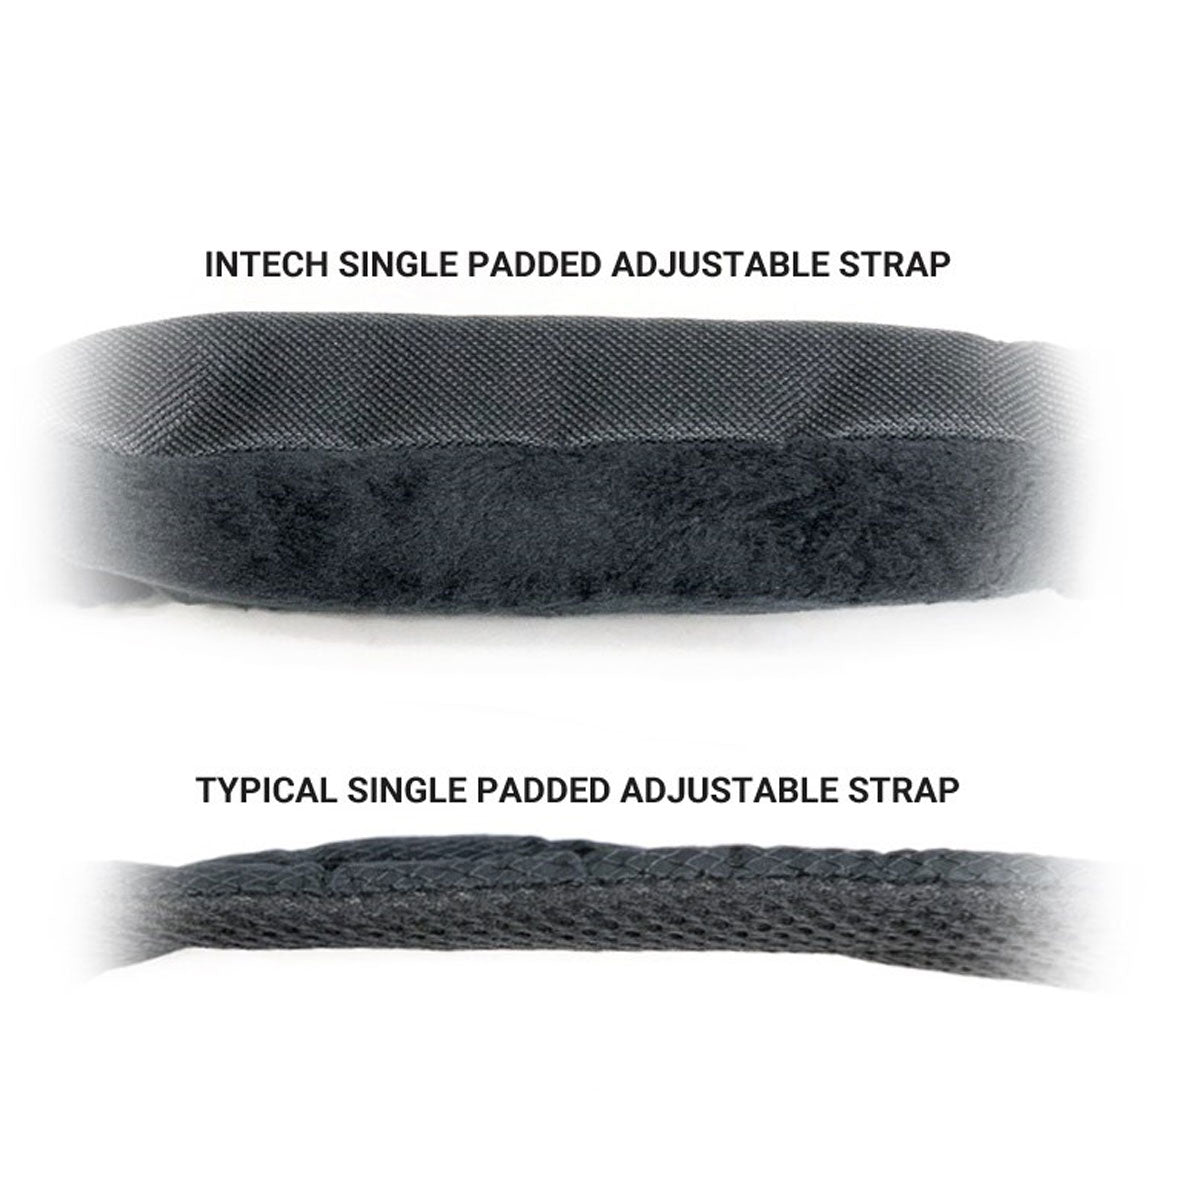 thickness of an Intech Single Padded Adjustable Golf Bag Strap compared to a much thinner typical competitors strap